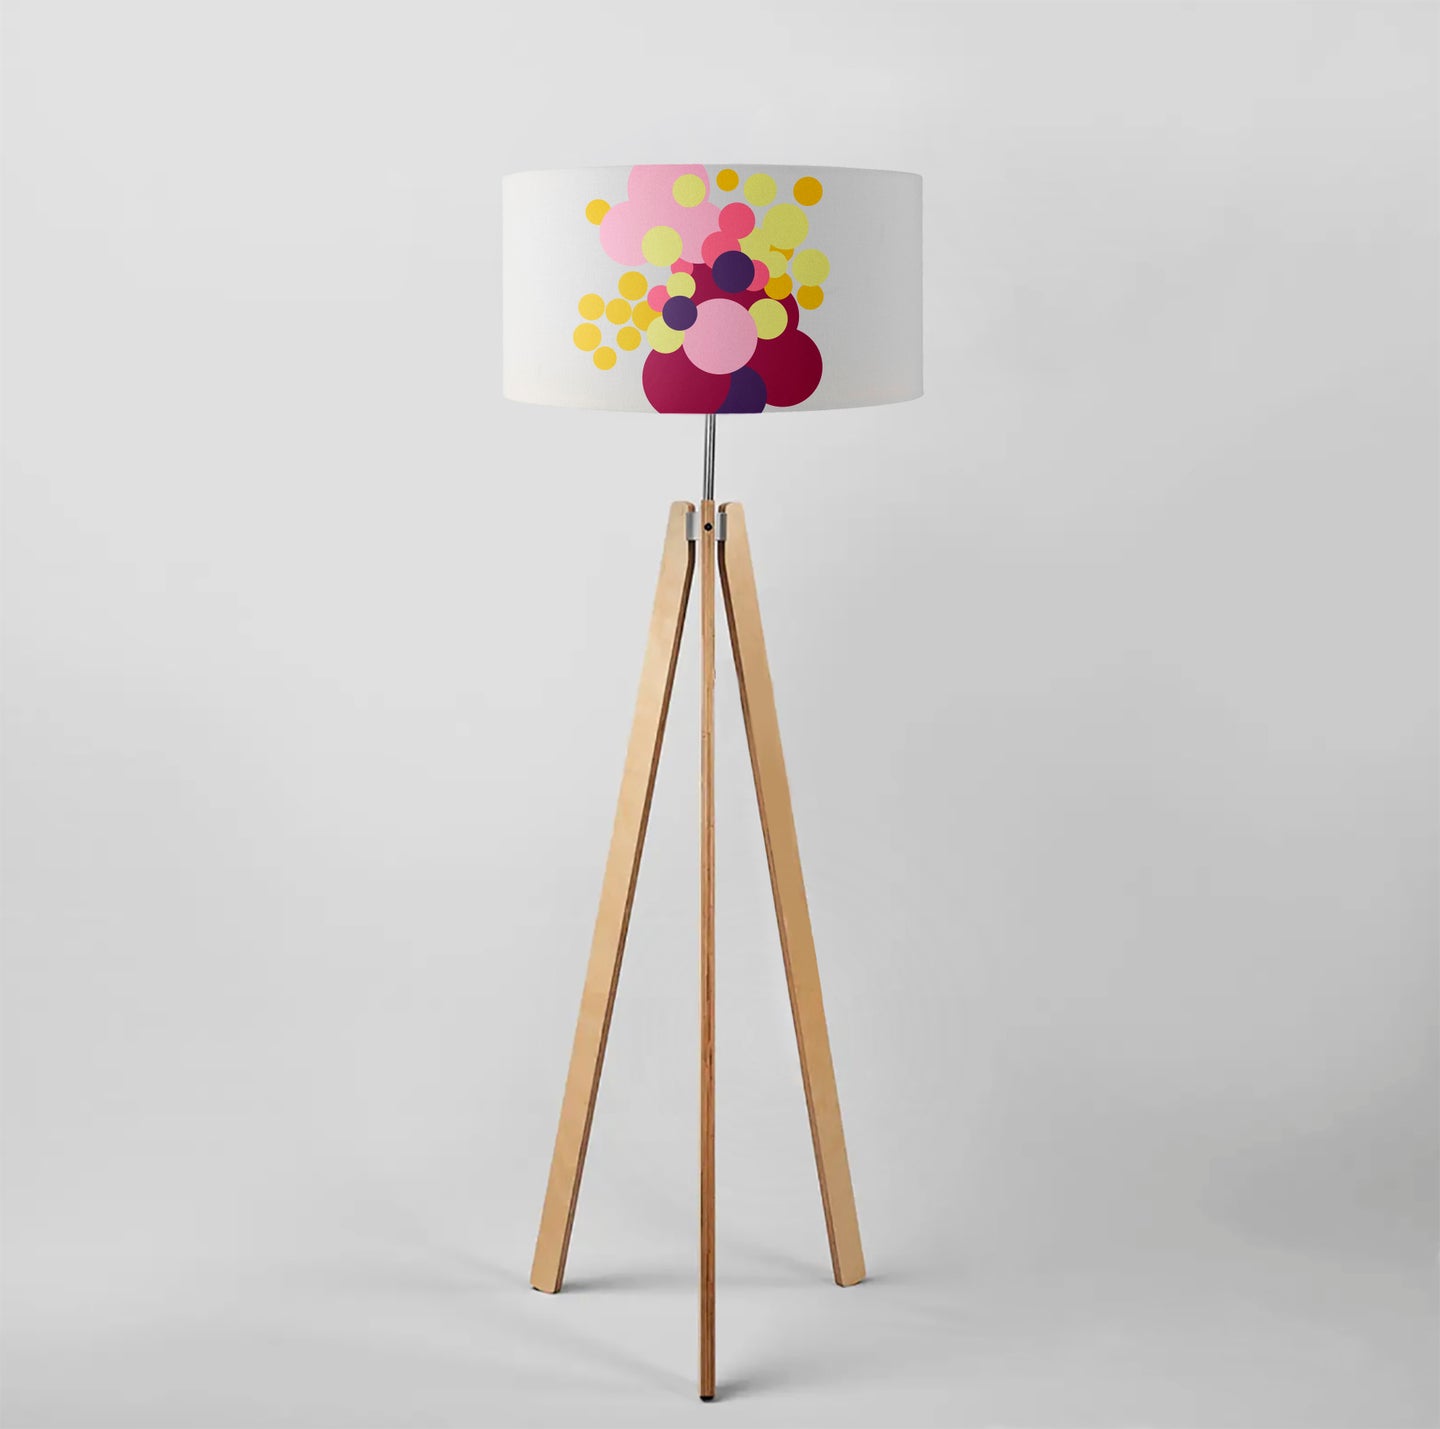 Geometric Abstract Bouquet of Flowers drum lampshade, Diameter 40cm (16